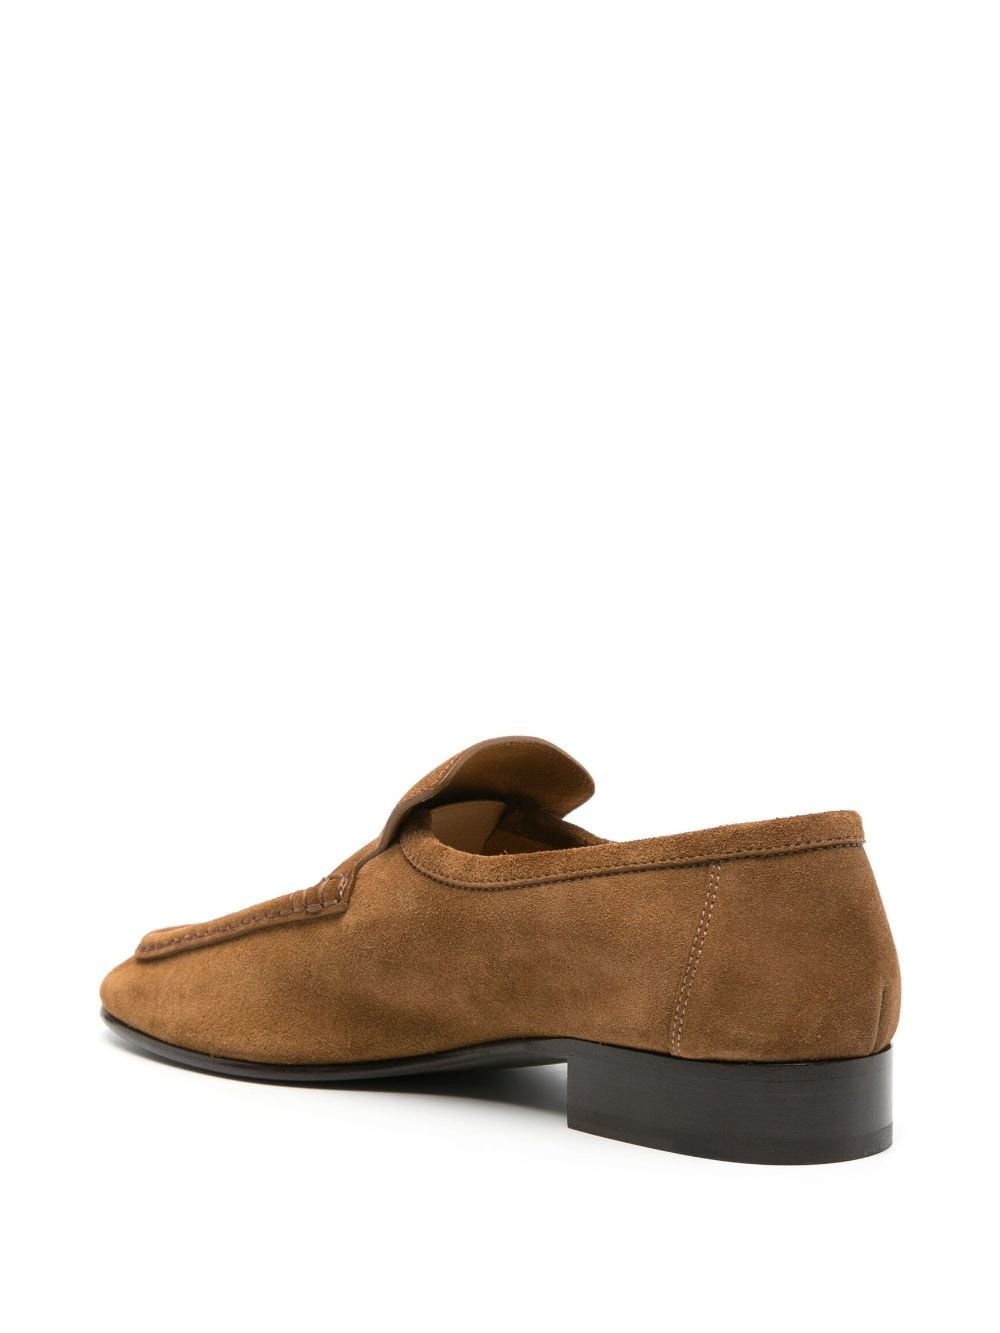 New Soft suede loafers - 3